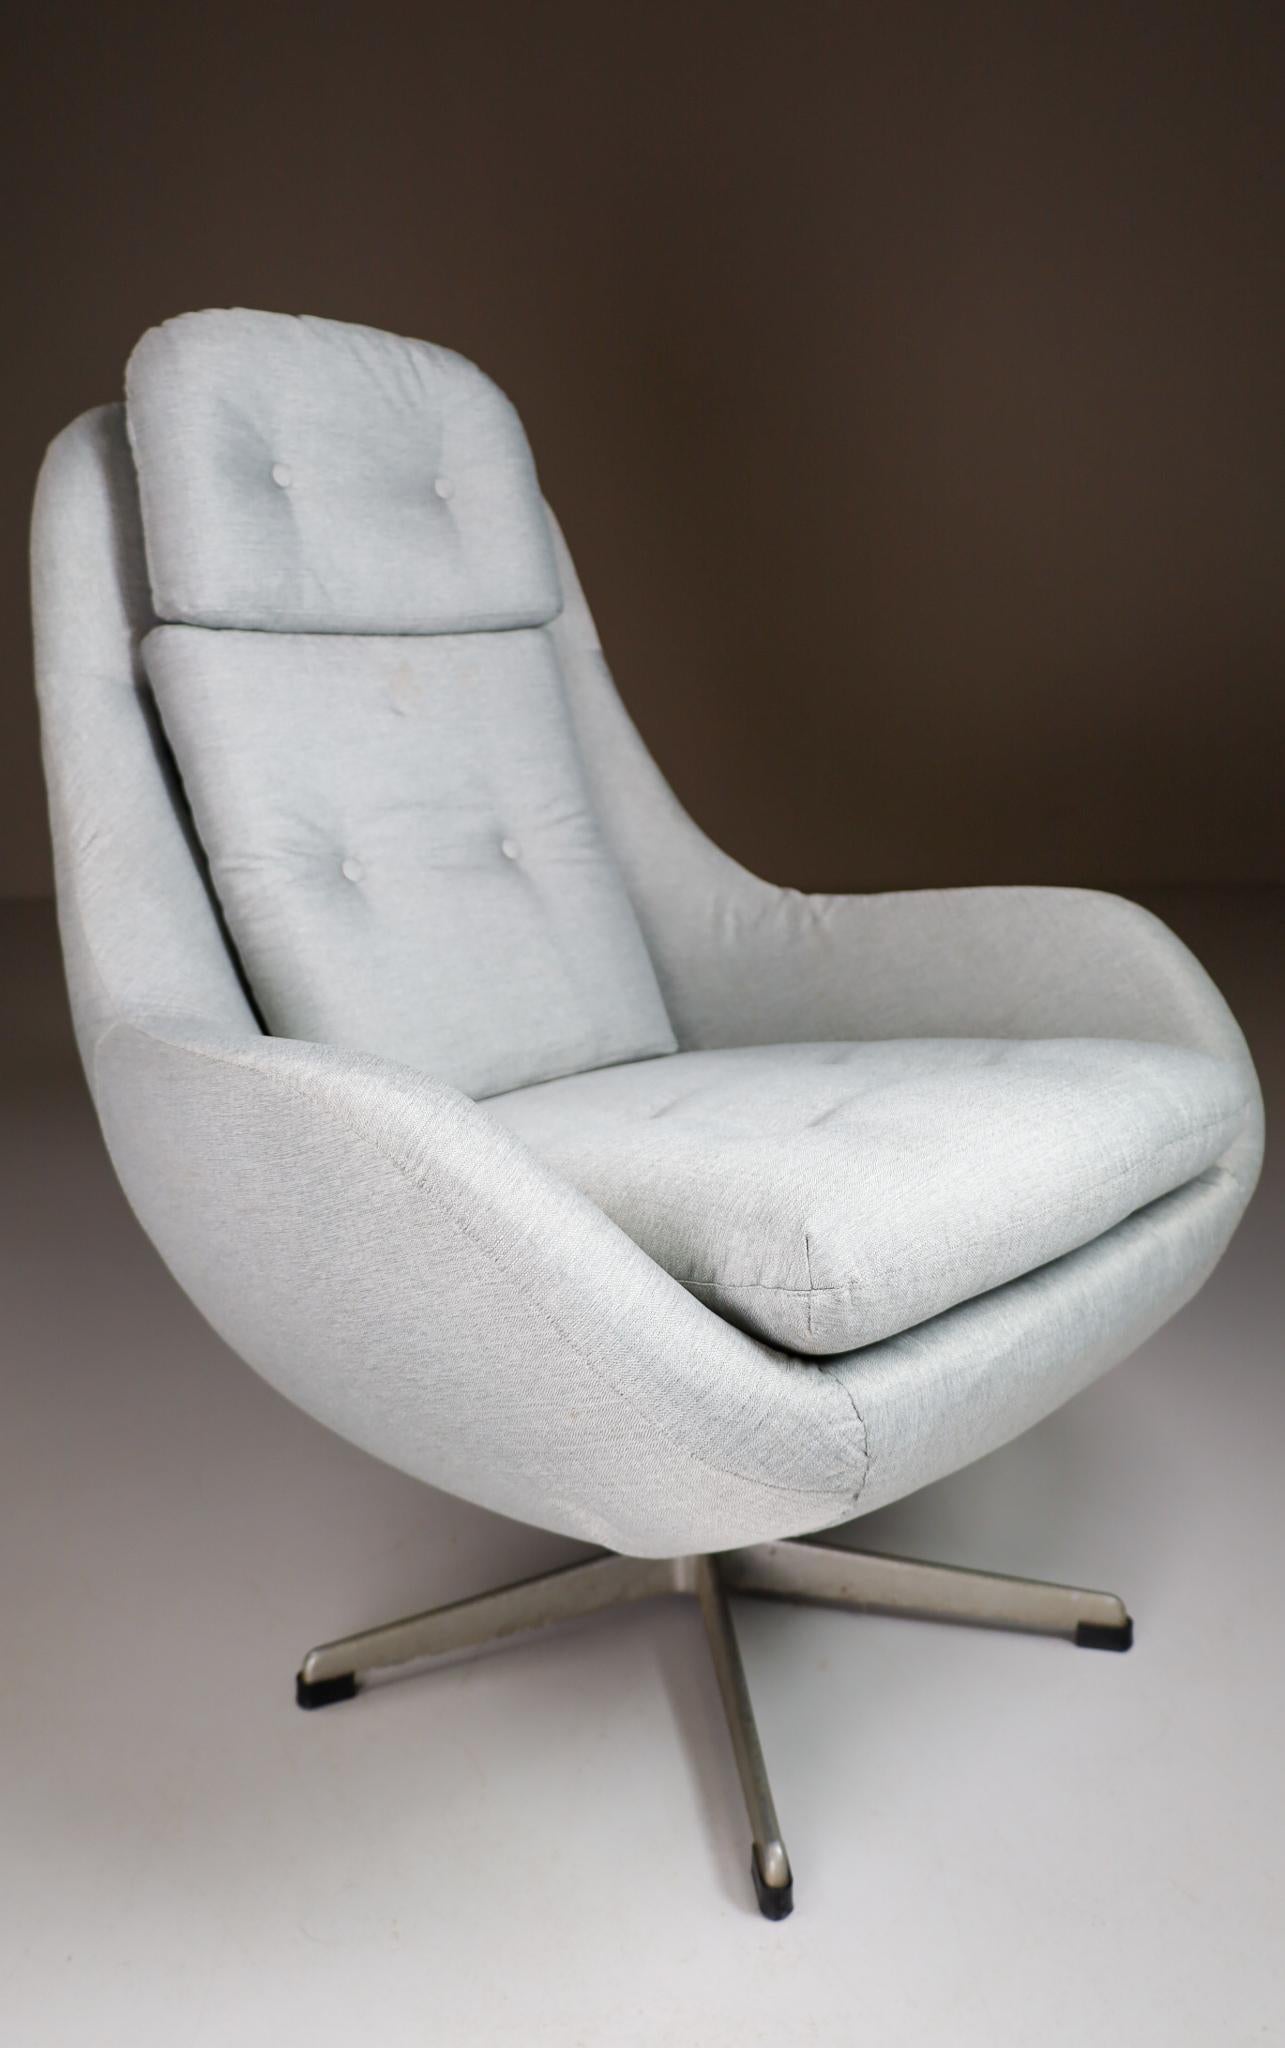 Midcentury Swivel Chair in New Reupholstered Fabric, Czech Republic 1970 In Good Condition For Sale In Almelo, NL